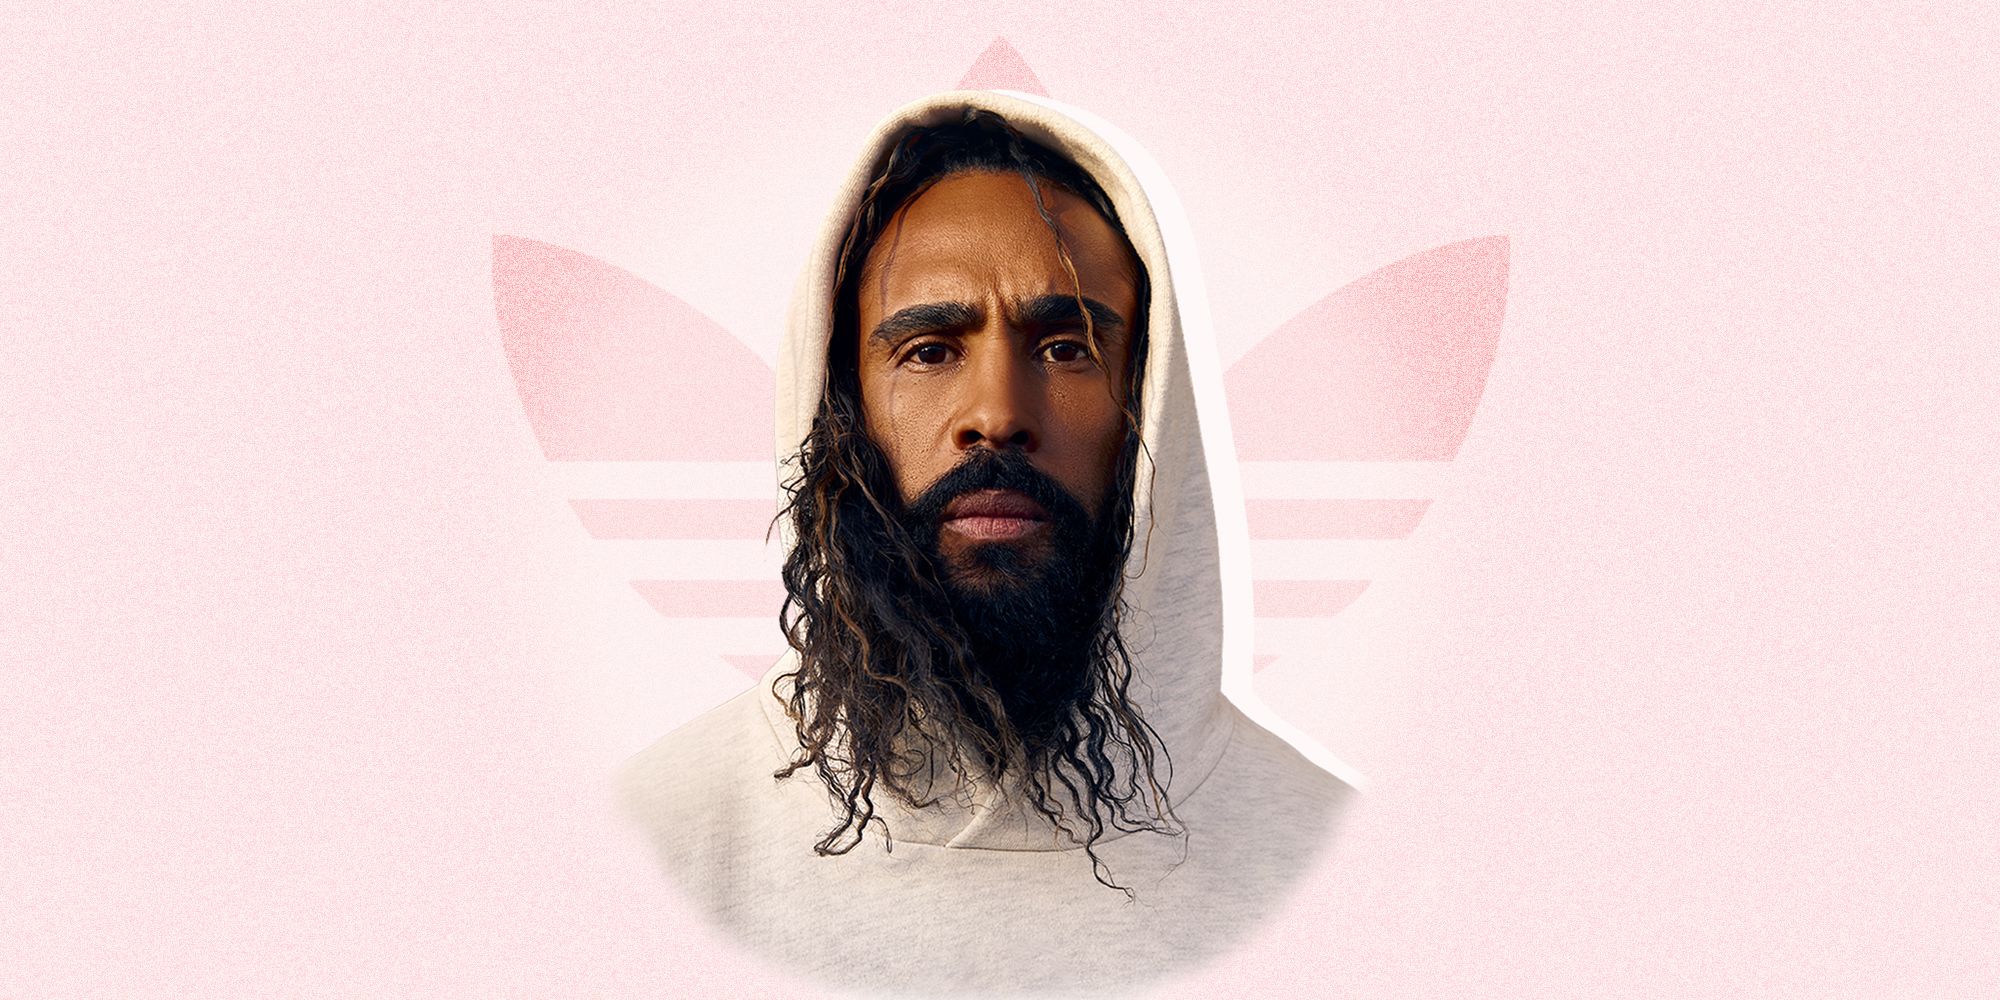 Fear of God's Jerry Lorenzo x adidas is finally happening! But